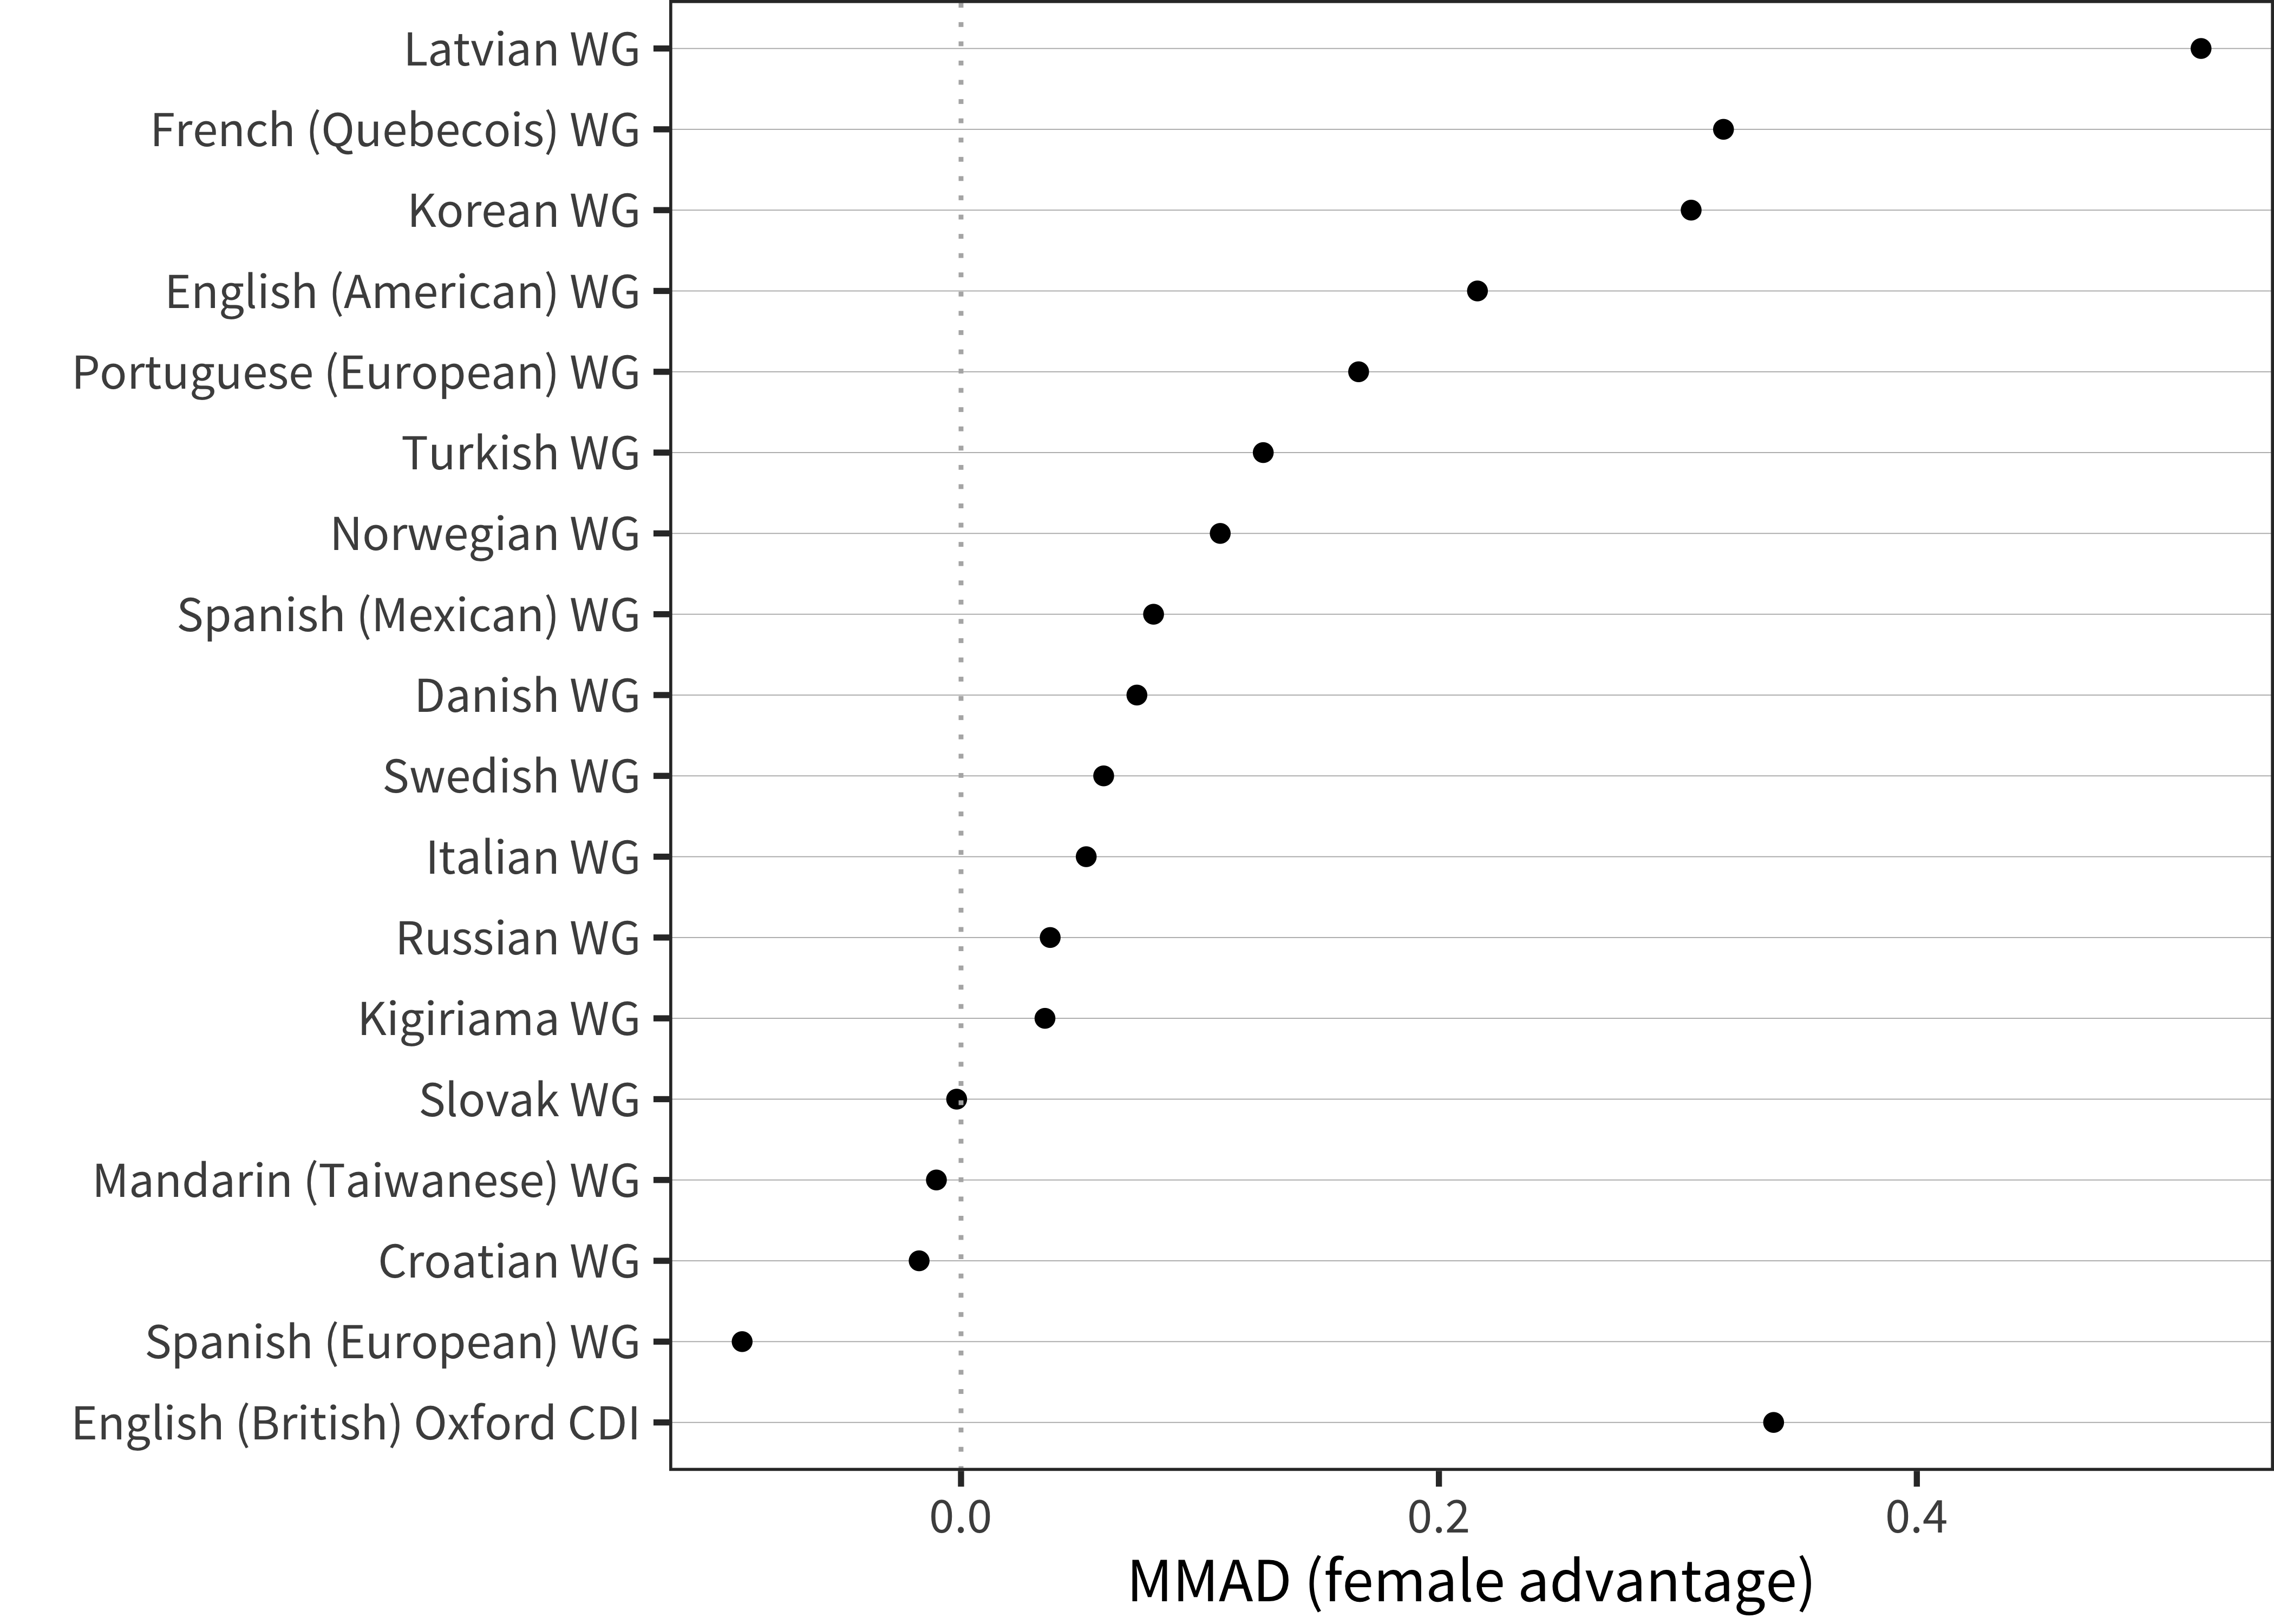 MMAD female advantage for WG comprehension data in each language averaged over age.